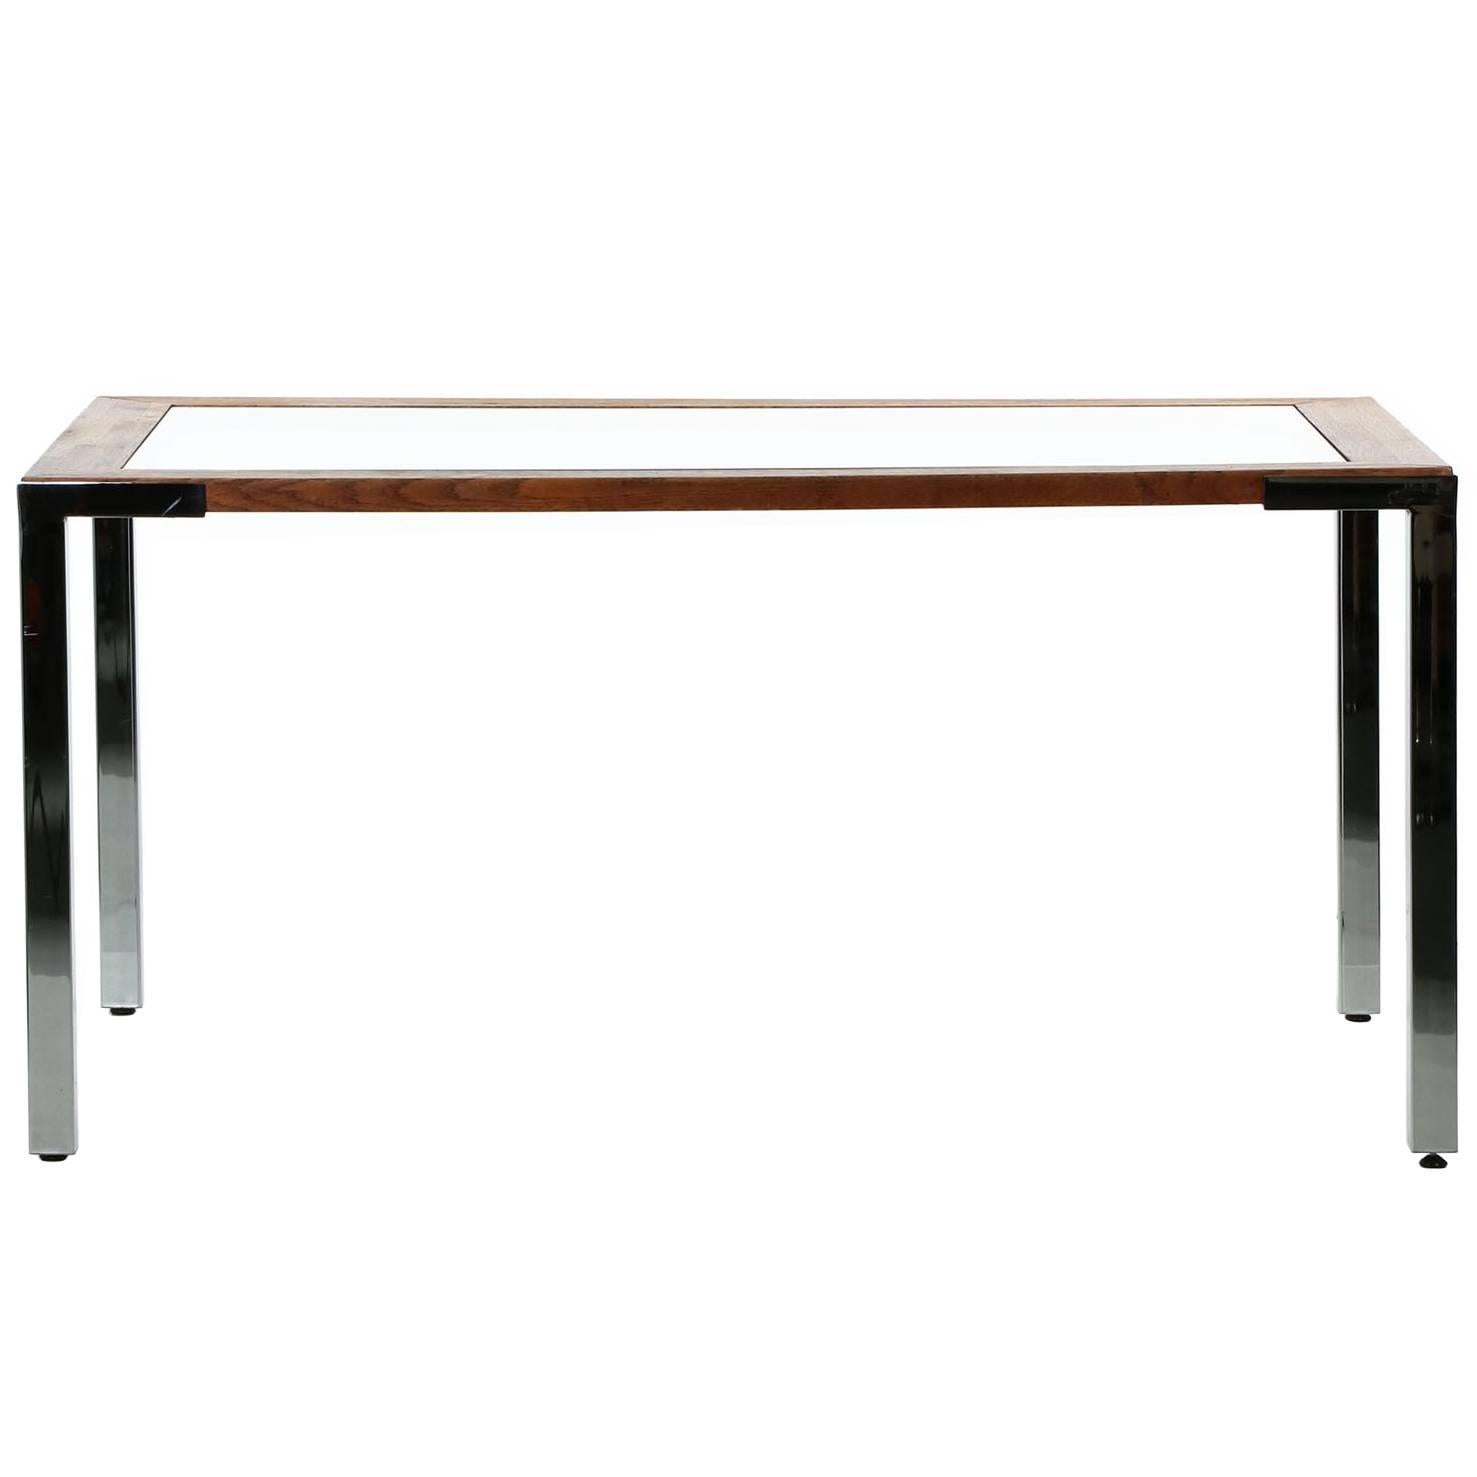 Modern Chrome, Glass and Dovetail Joined Oak Dining Table c. 1980's